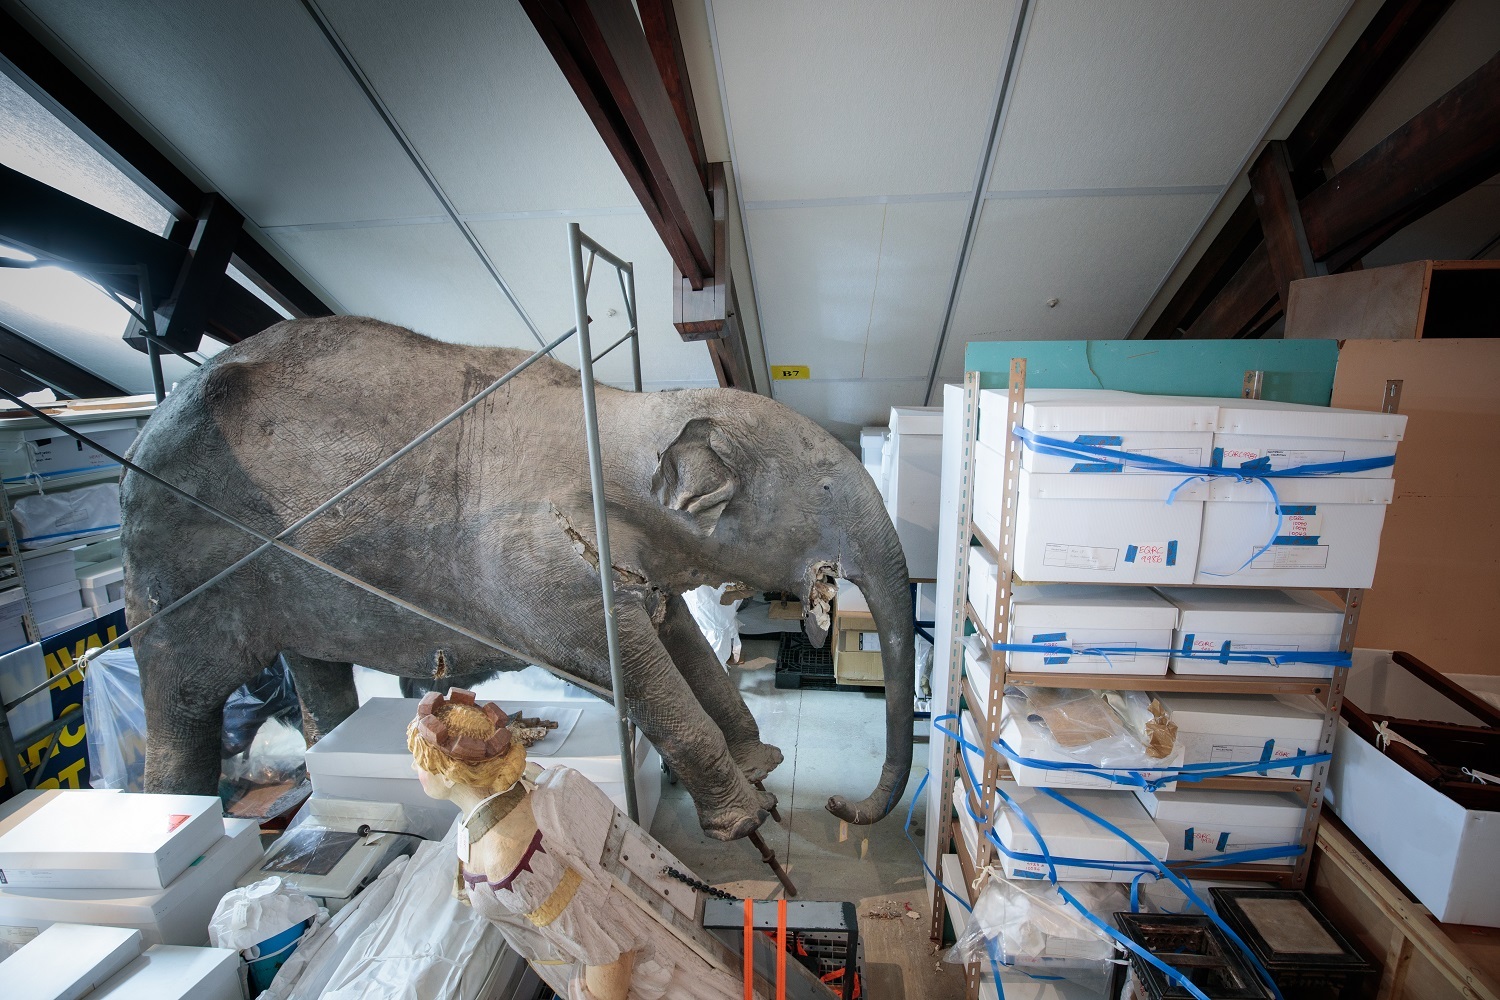 This taxidermied elephant is one of many stuffed mammals stored in the Mammal Attic.